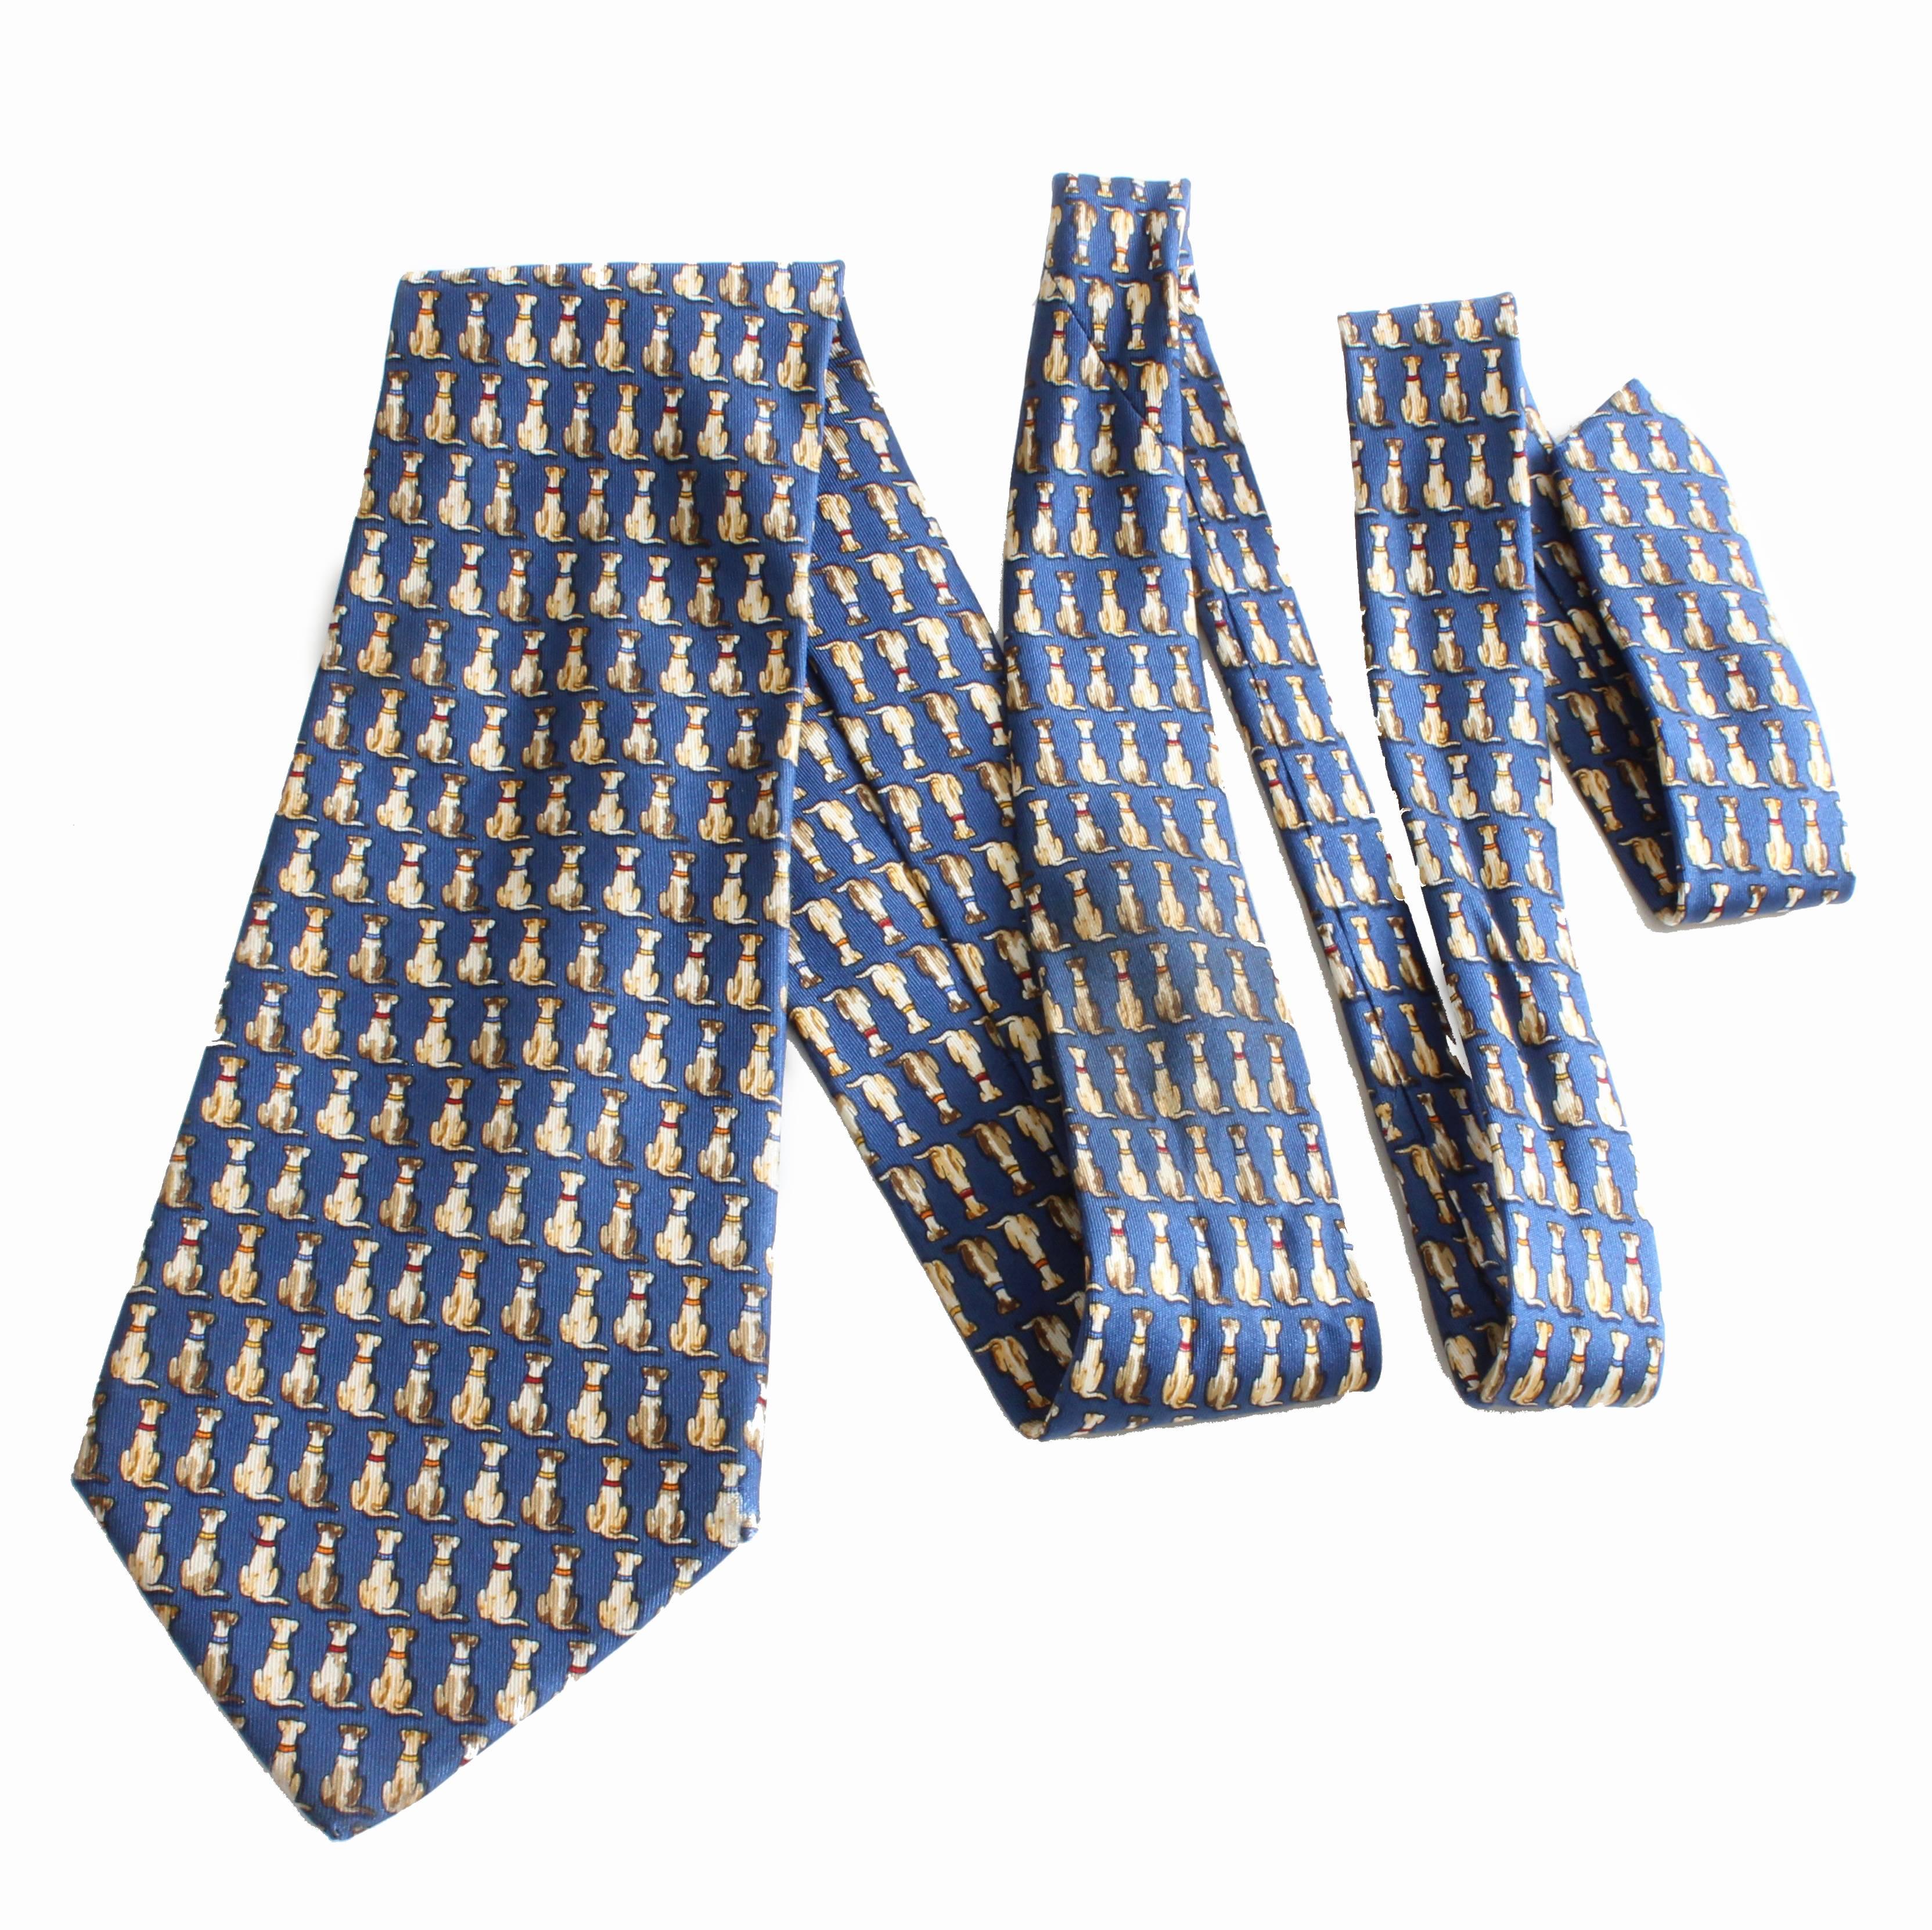 A whimsical tie by Ferragamo featuring sitting dogs.  In very good preowned condition with minimal signs of prior wear.  Tagged SALVATORE FERRAGAMO MADE IN ITALY.